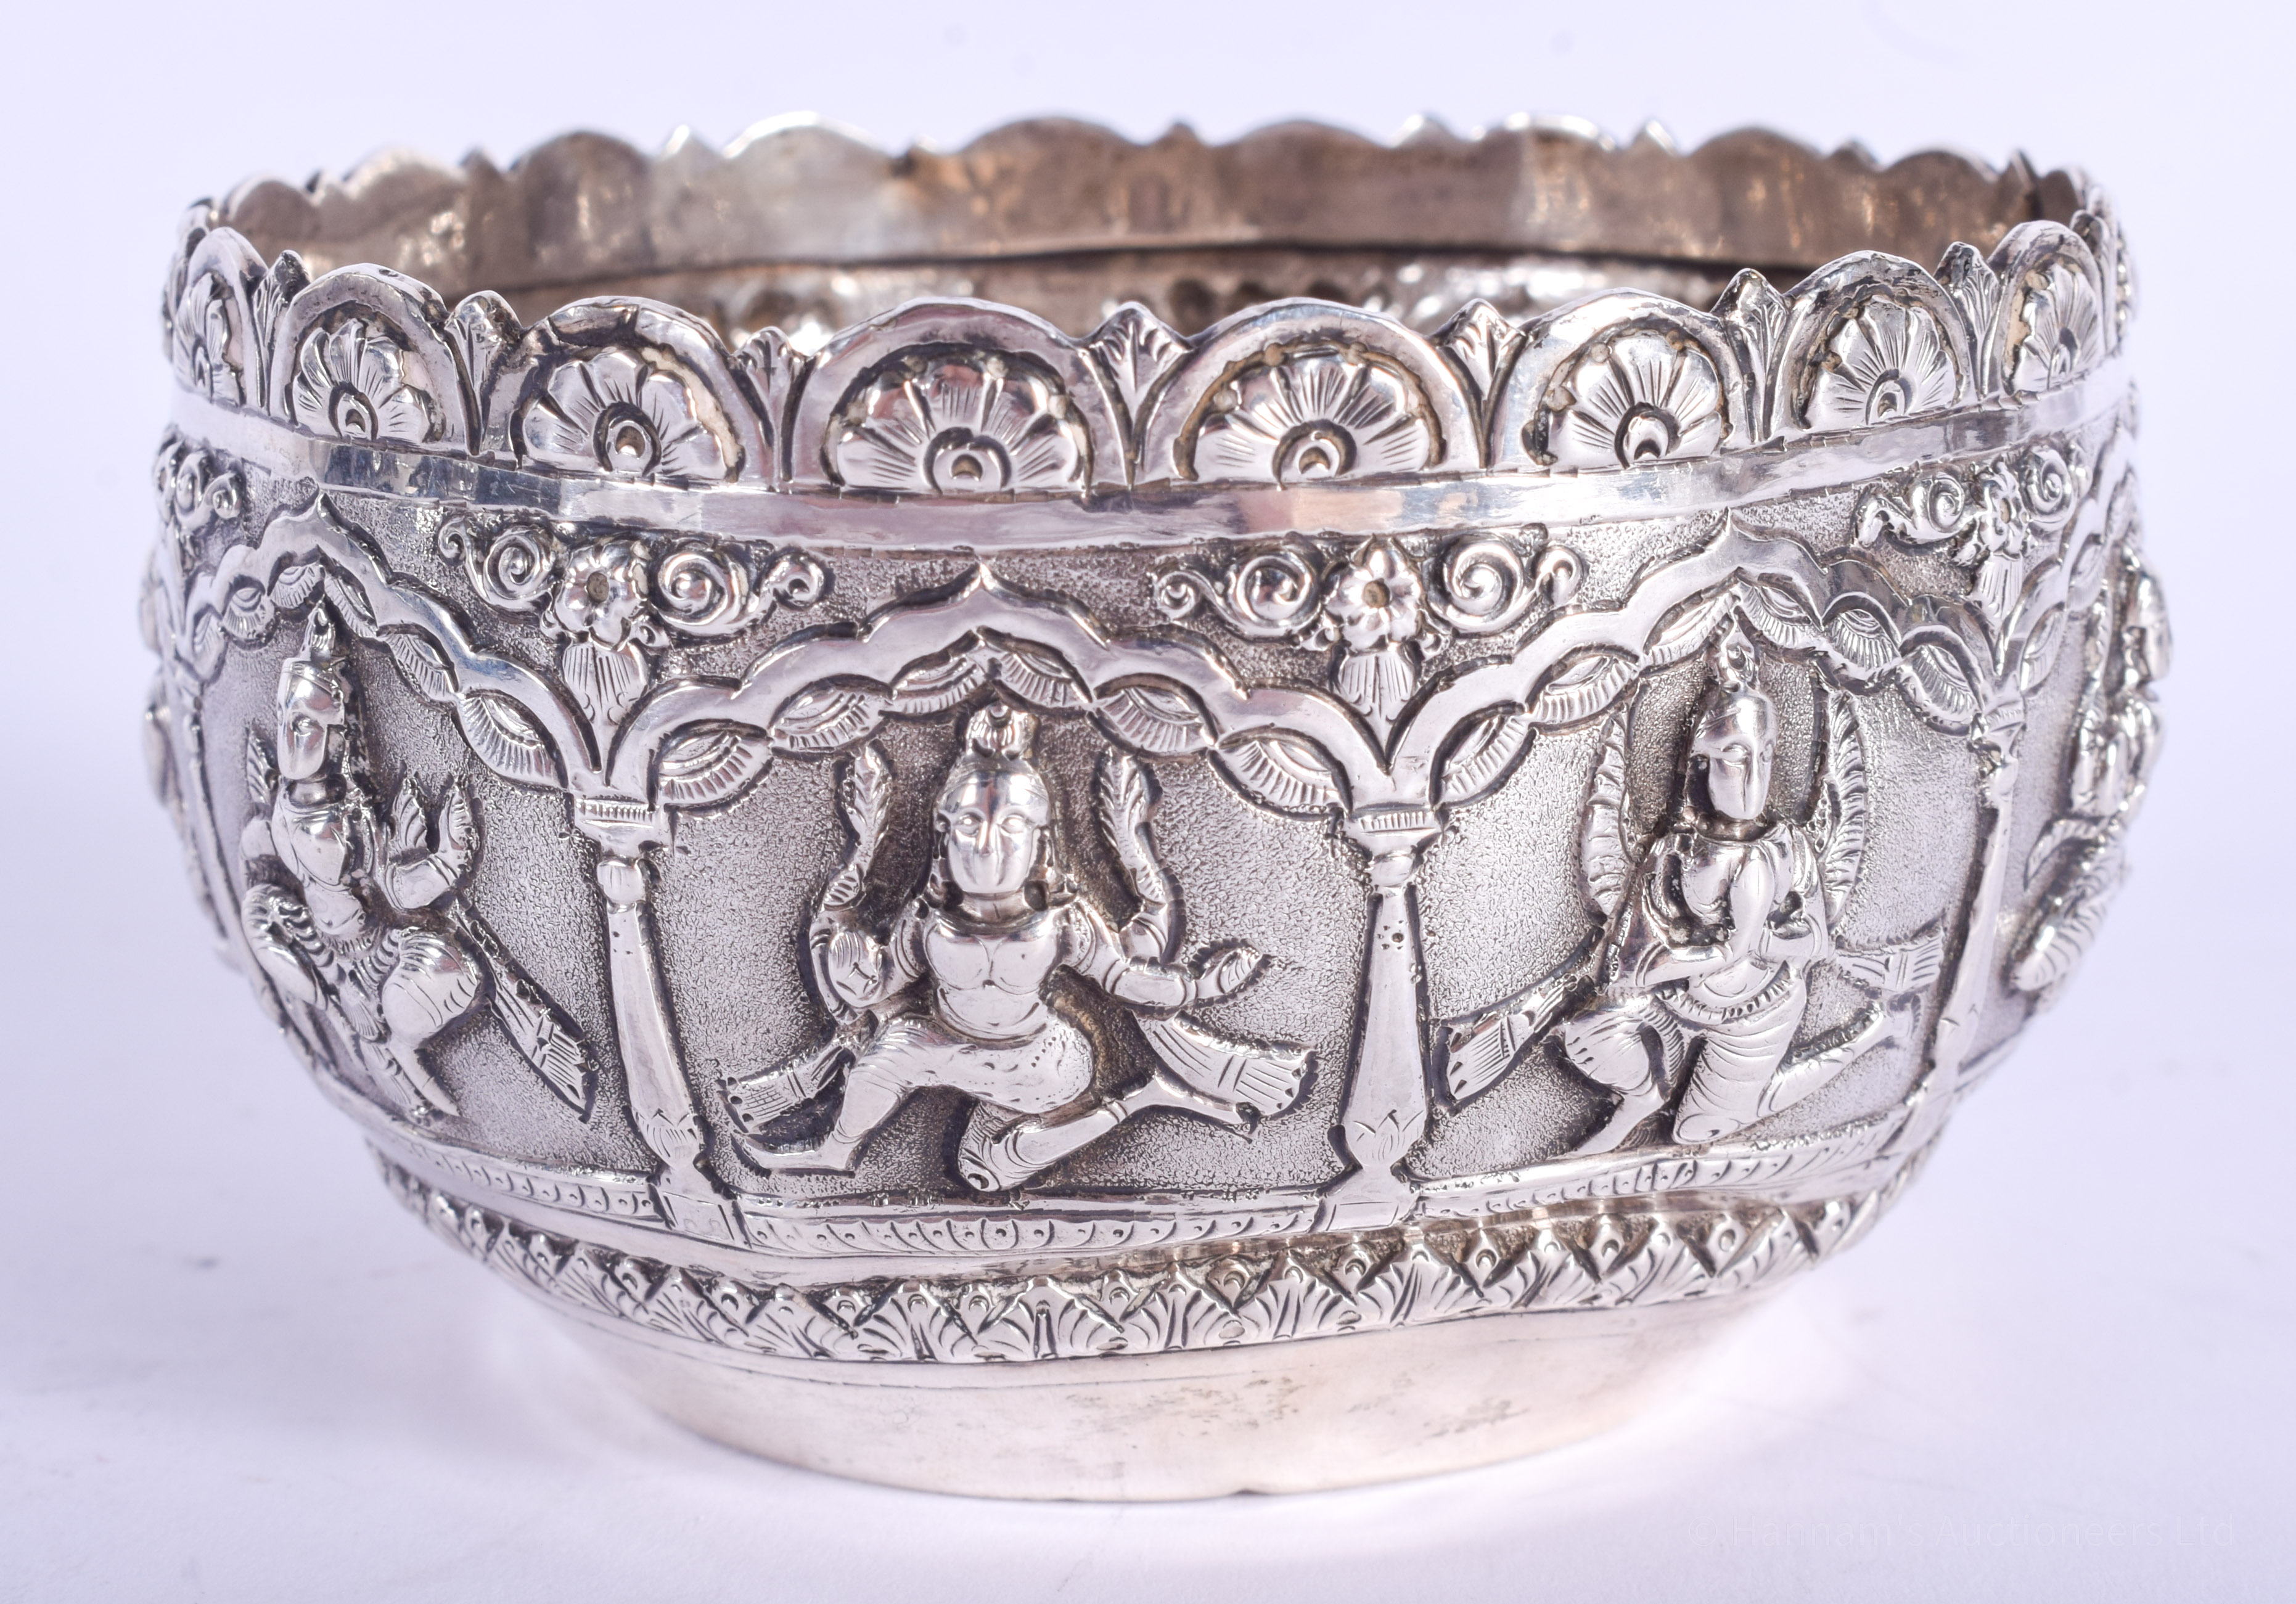 A VERY UNUSUAL ENGLISH SILVER INDIAN STYLE SUGAR BOWL. 95 grams. 9.5 cm wide. - Image 2 of 6